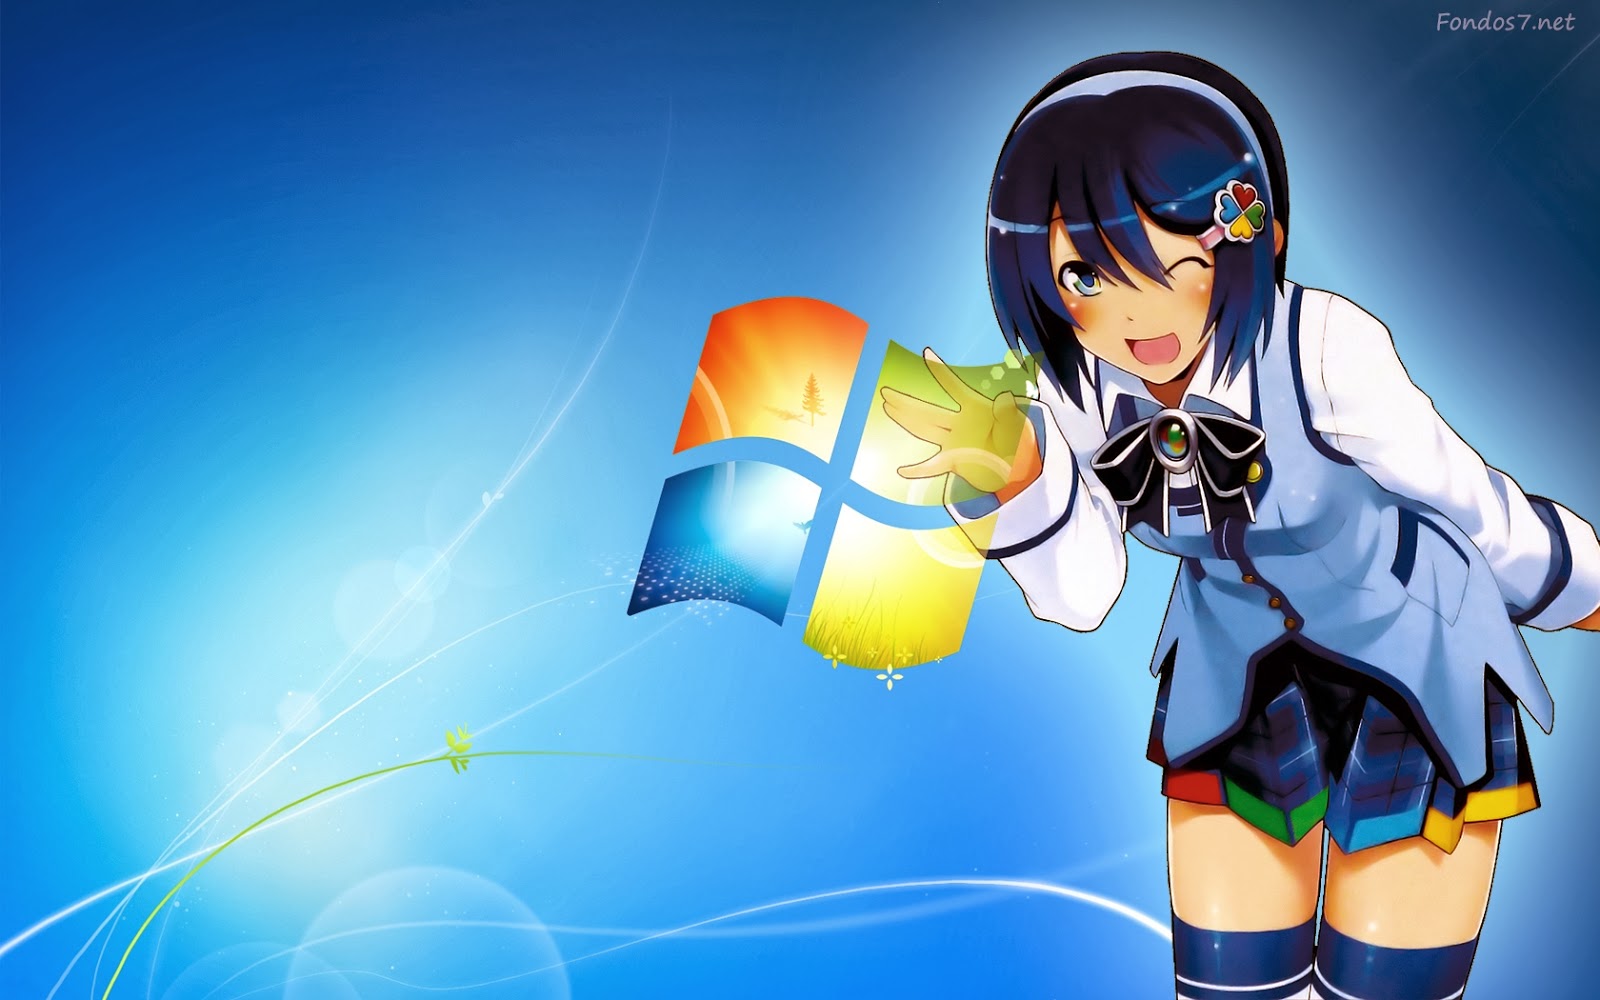 Anime Wallpaper Download Now In 4K Resolution  Best Wallpapers On Internet  Free To Download